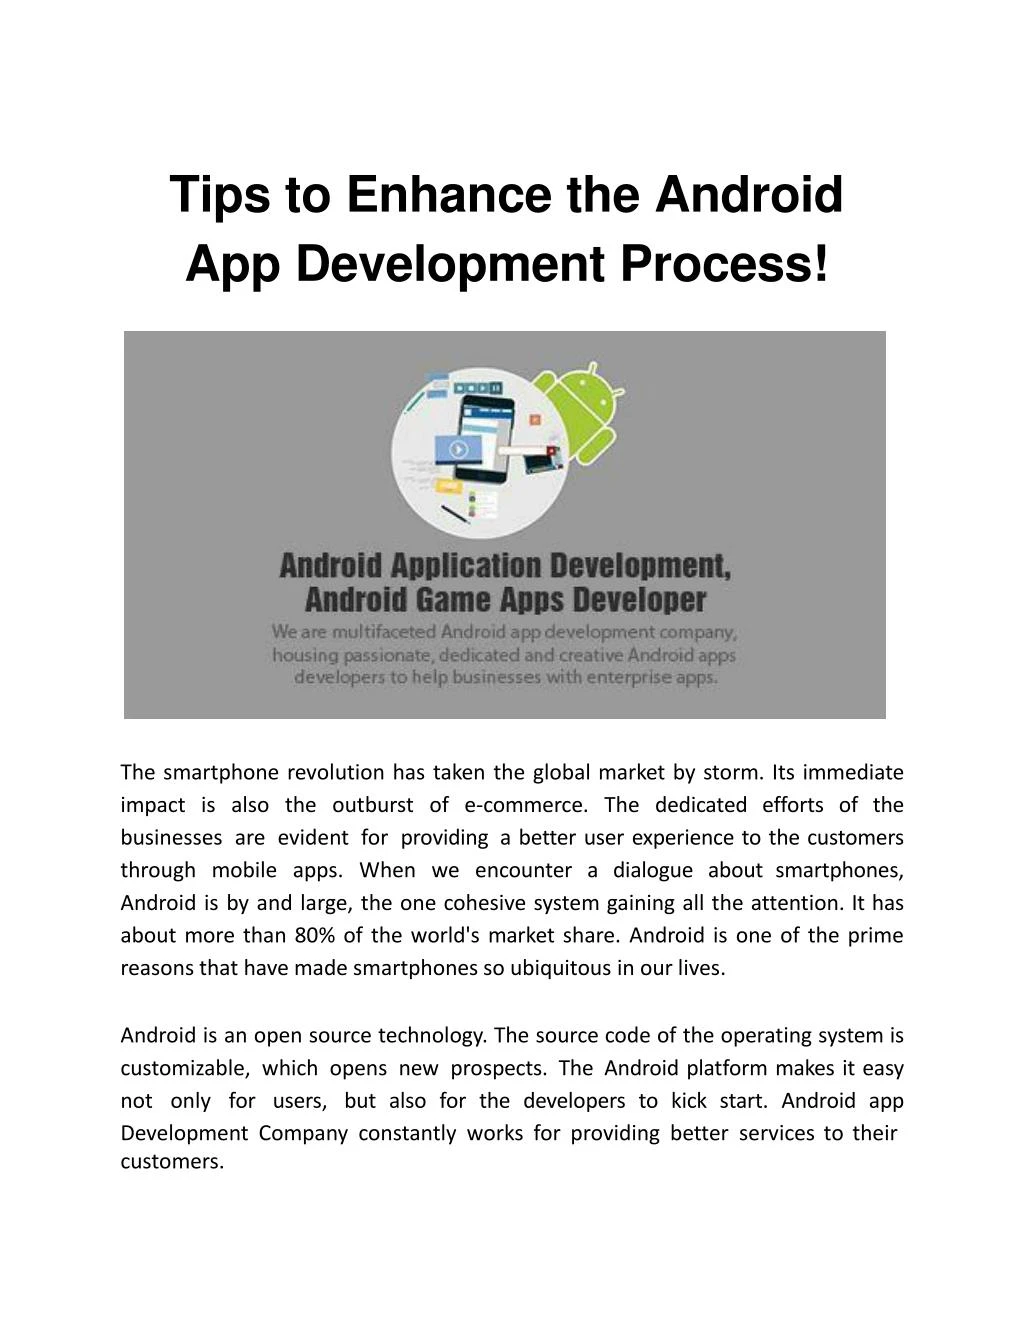 tips to enhance the android app development process